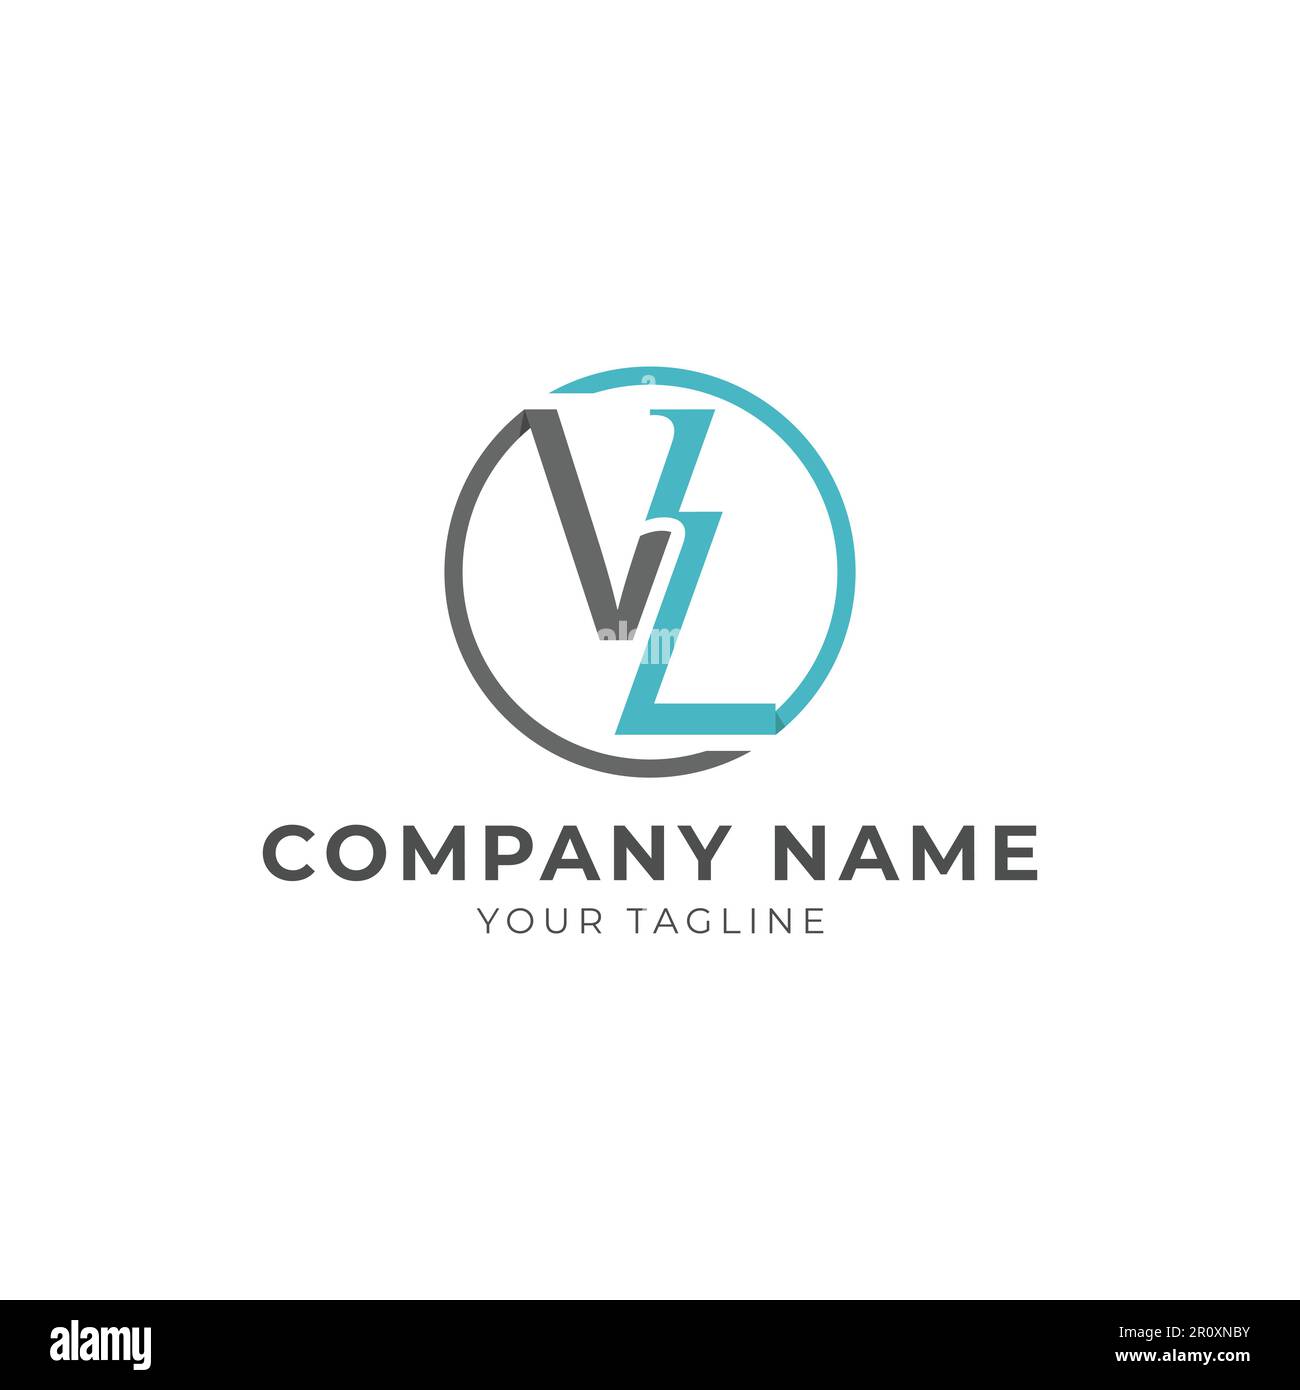 Premium Vector  Initial vl logo design, suitable for logo company, logo  business, and brand identity